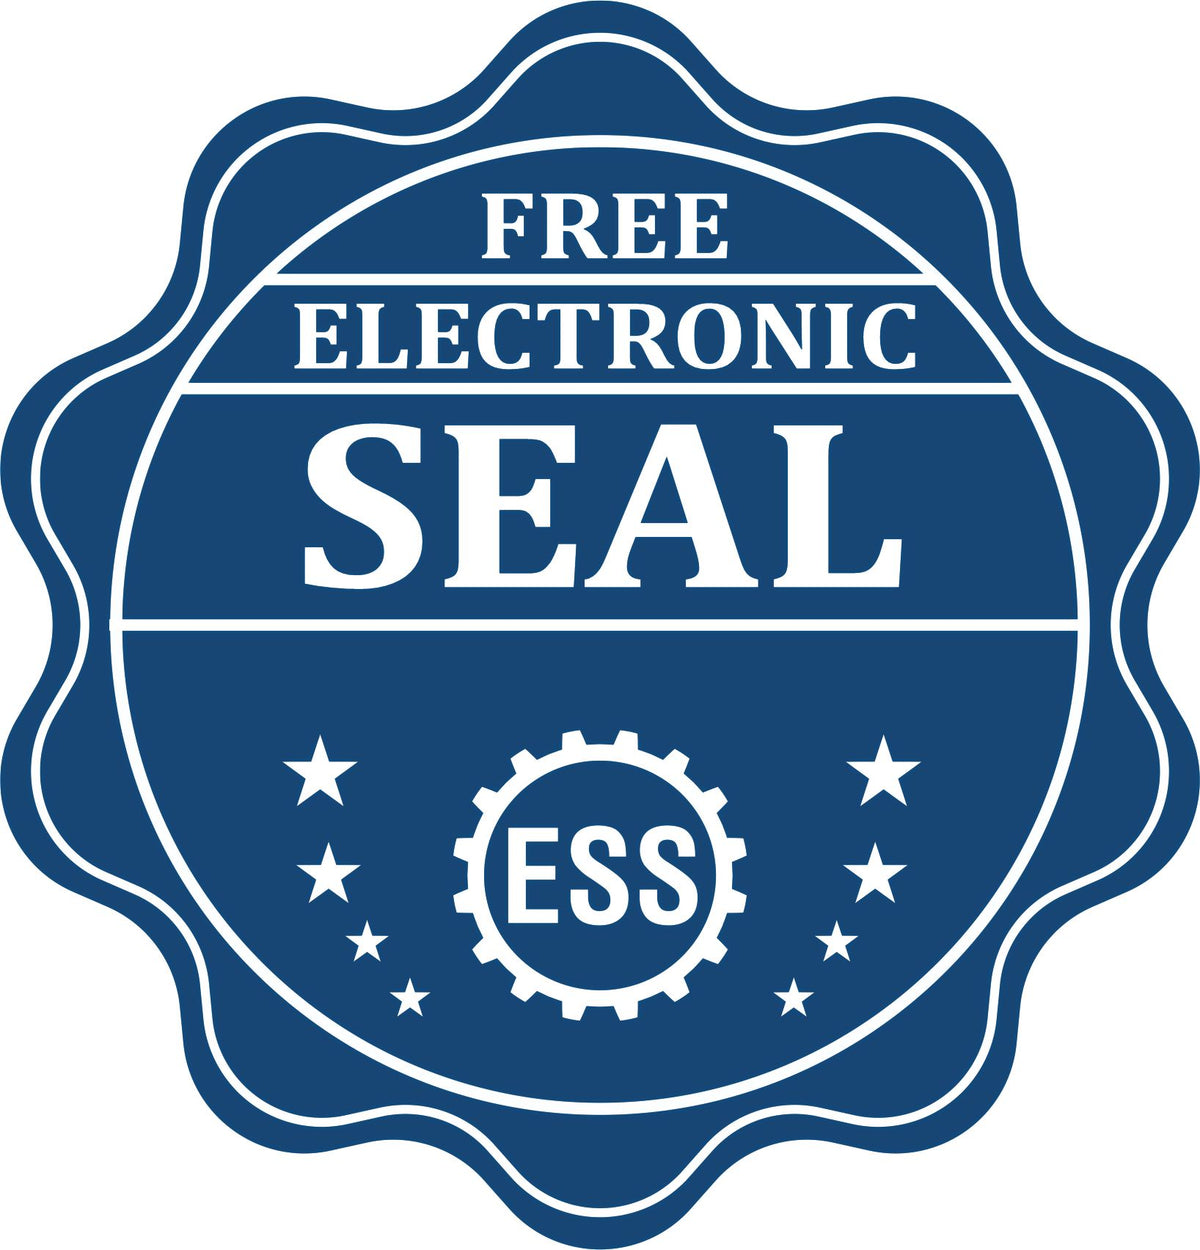 A badge showing a free electronic seal for the Long Reach New York Geology Seal with stars and the ESS gear on the emblem.